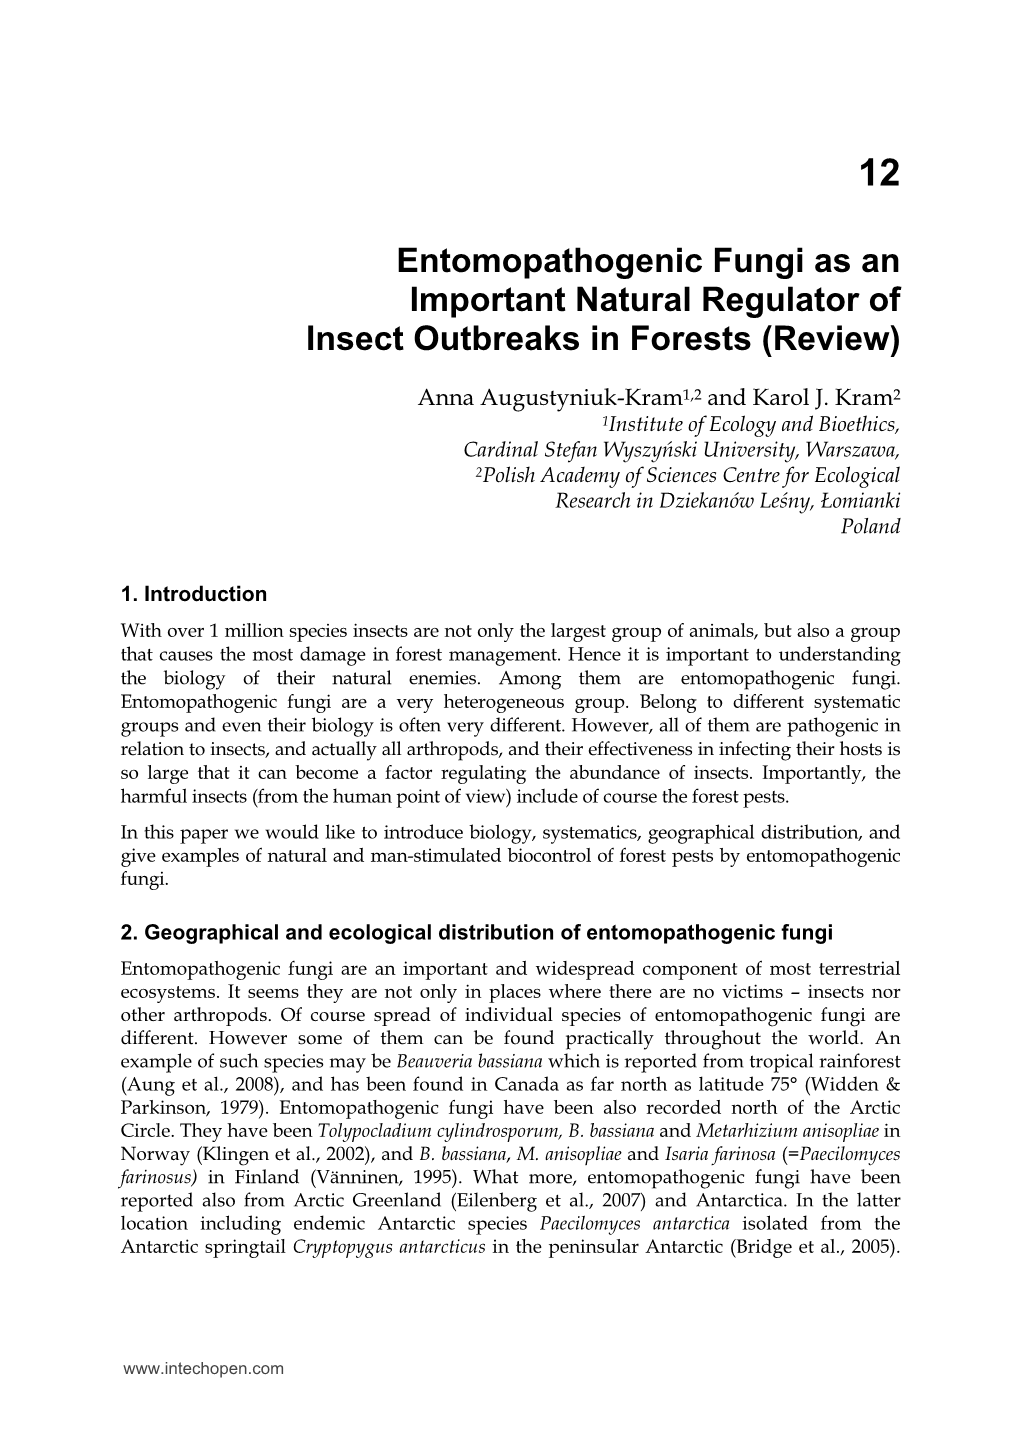 Entomopathogenic Fungi As an Important Natural Regulator of Insect Outbreaks in Forests (Review)